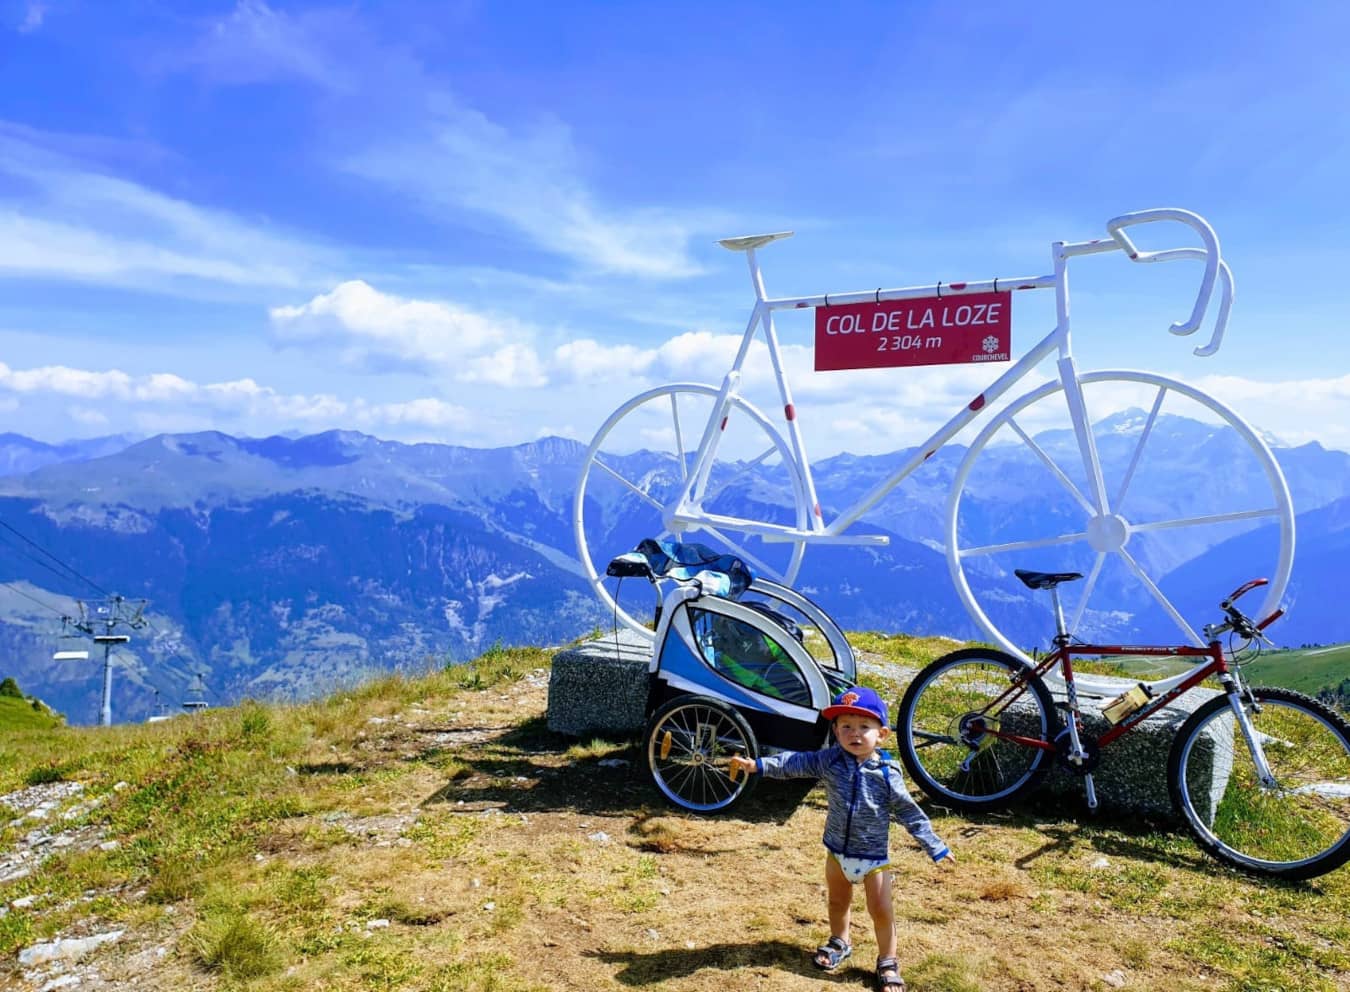 Ascent to the Col de la Loze with the family thanks to the electric bike in Méribel in Les 3 Vallées